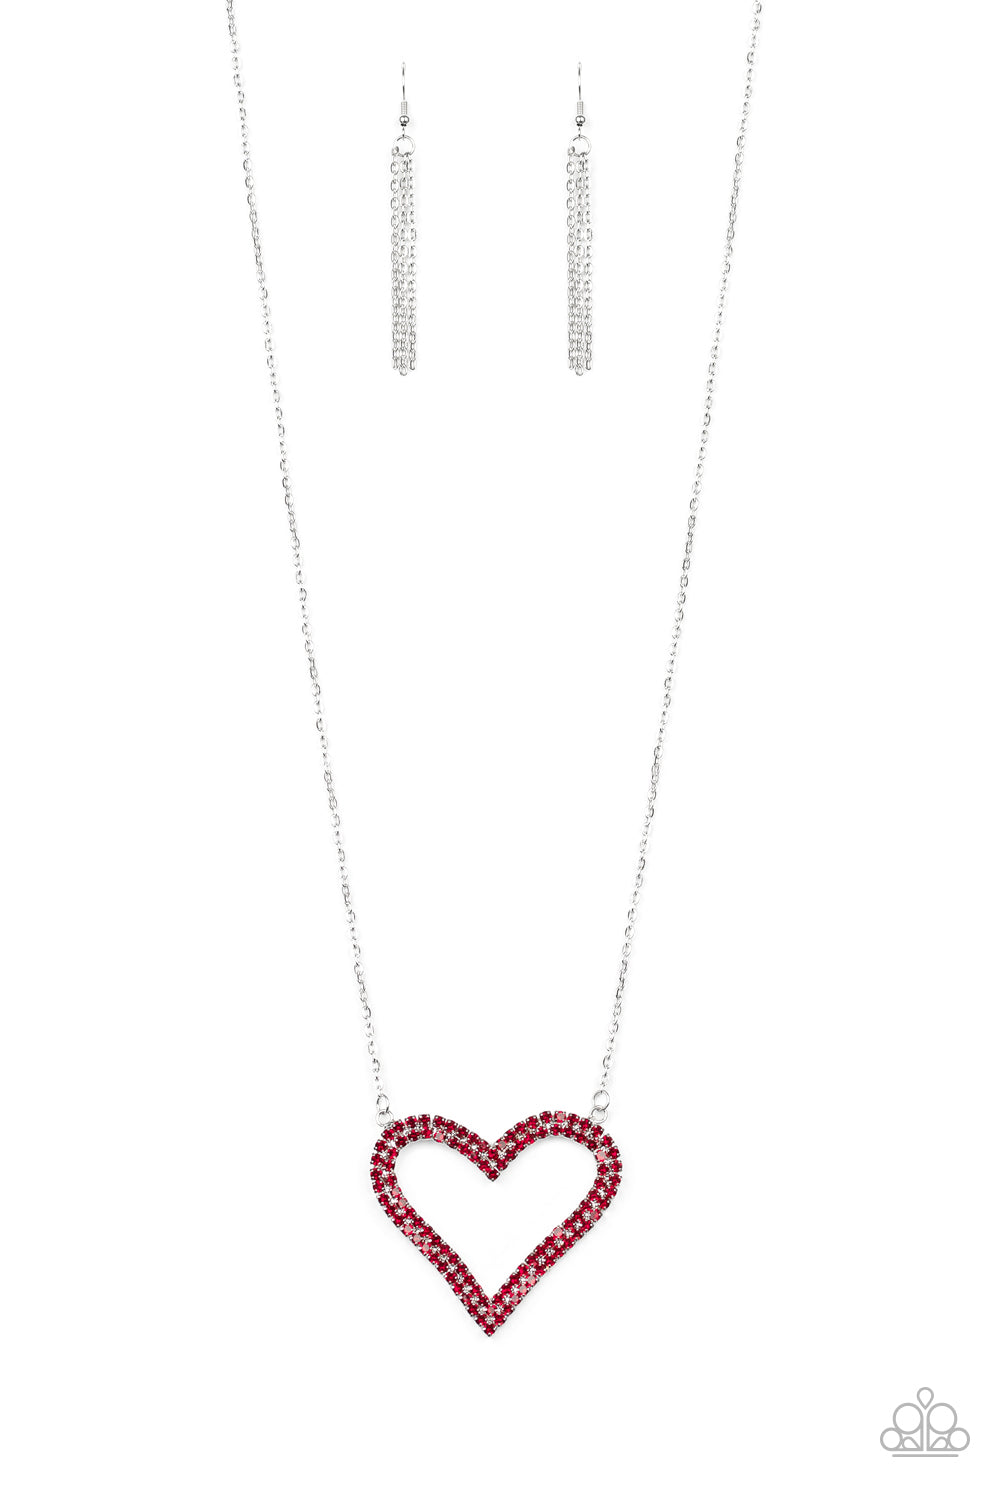 pull-some-heart-strings-red-p2re-rdxx-179su